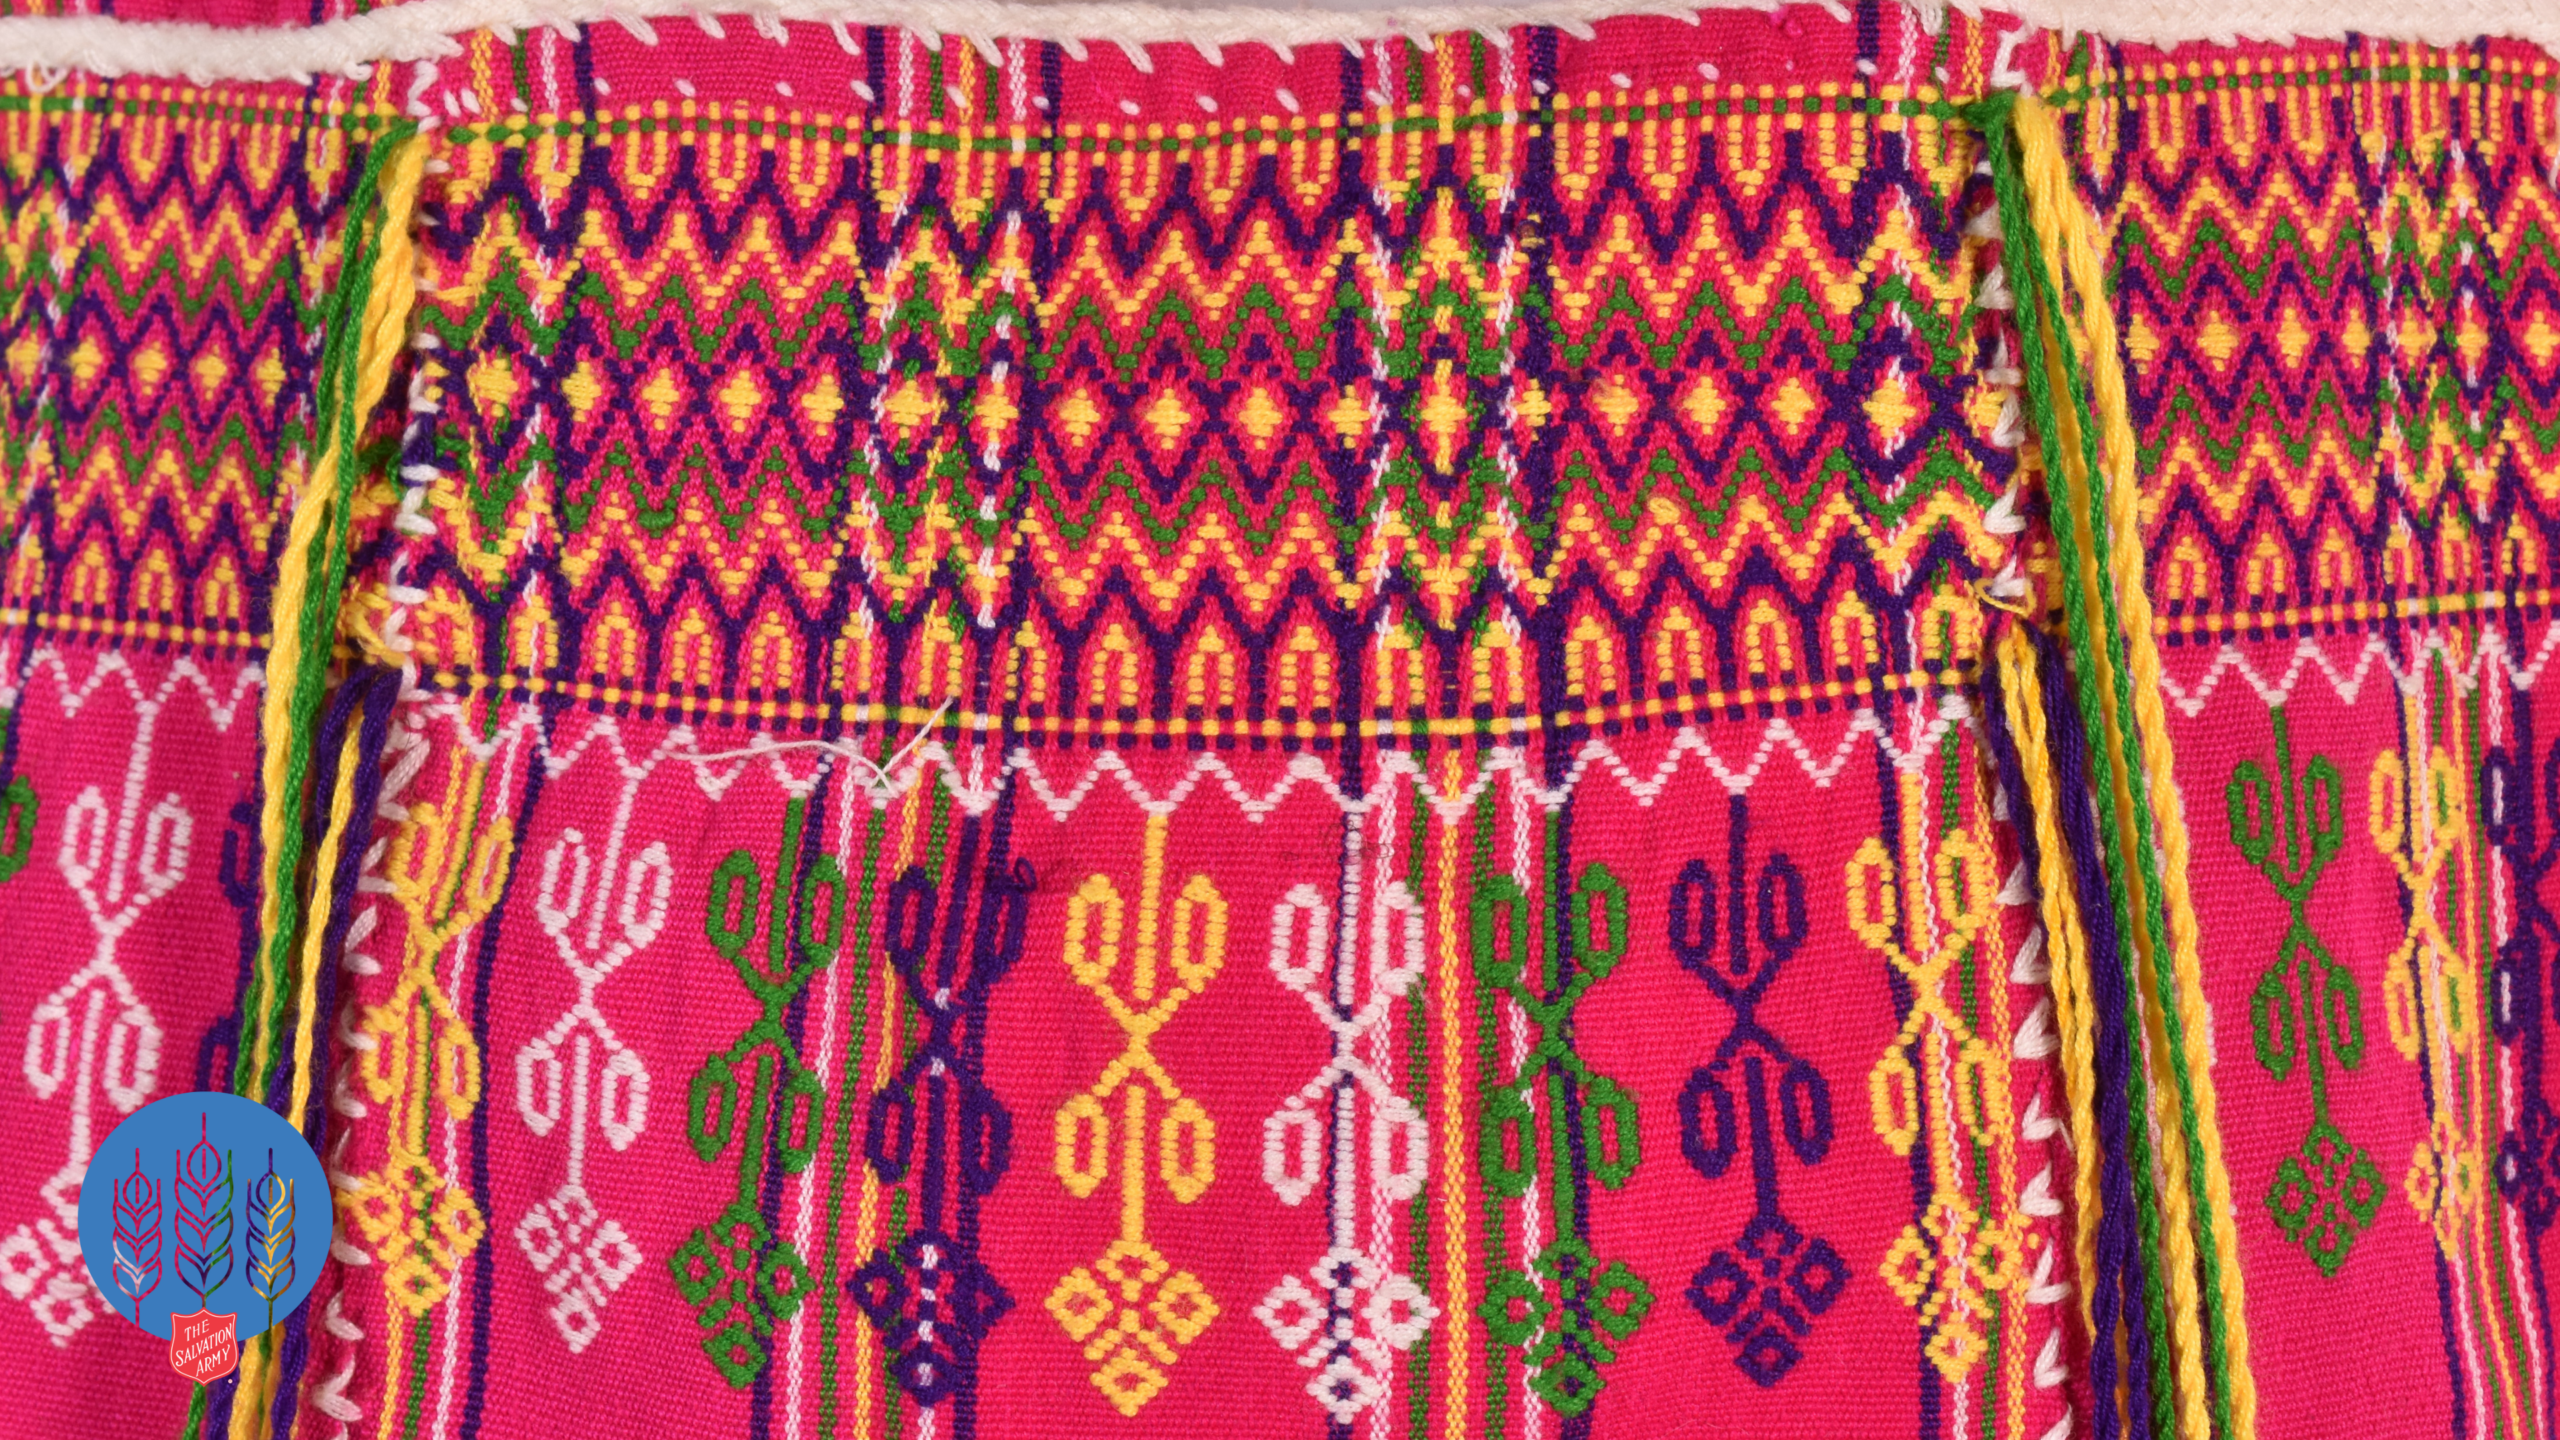 Detail photograph of colorful embroidery on a pink shoulder bag.